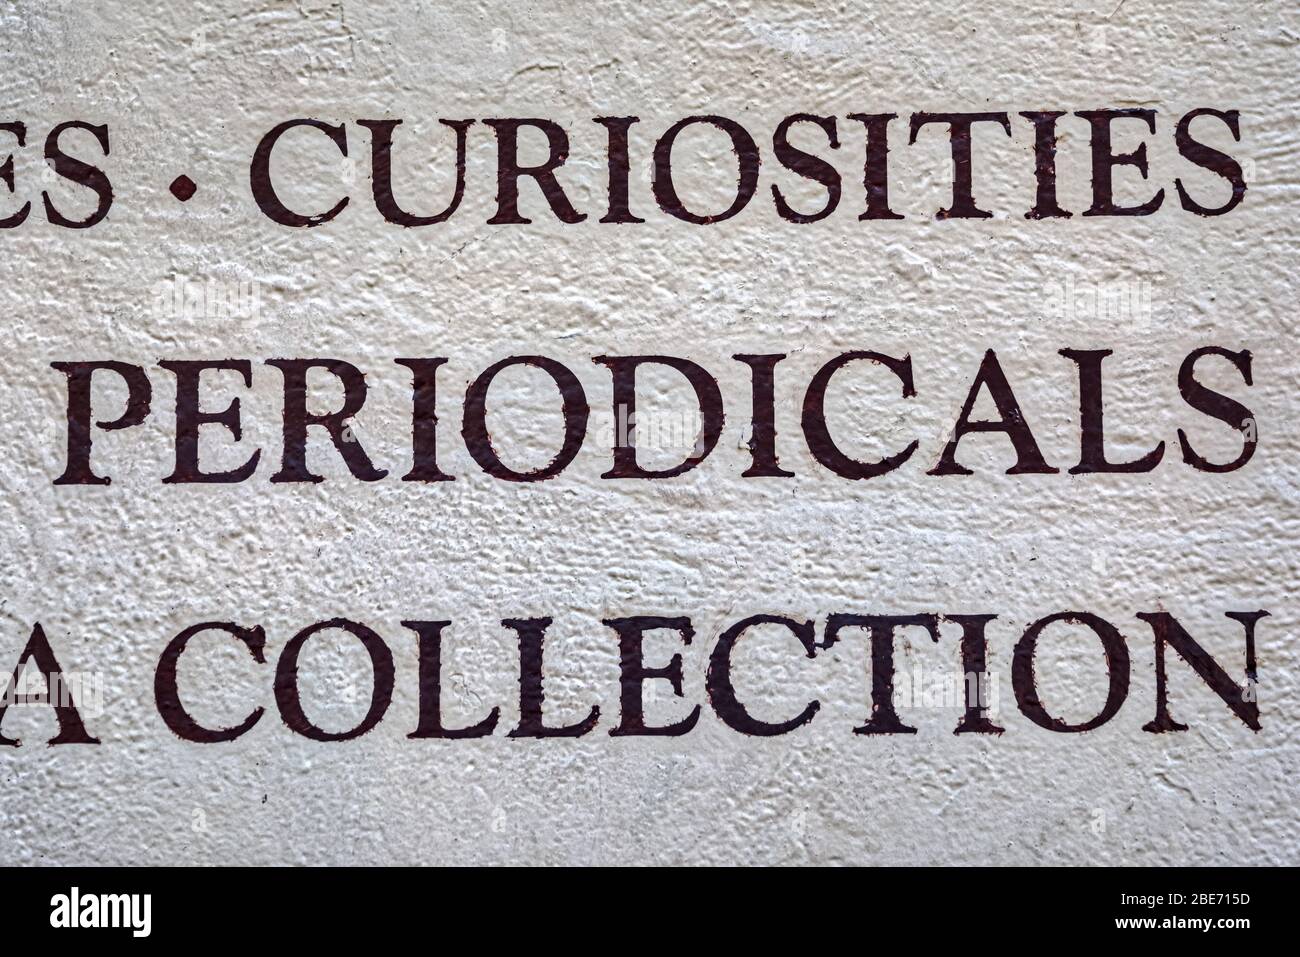 Curiosities, periodicals and collection Stock Photo